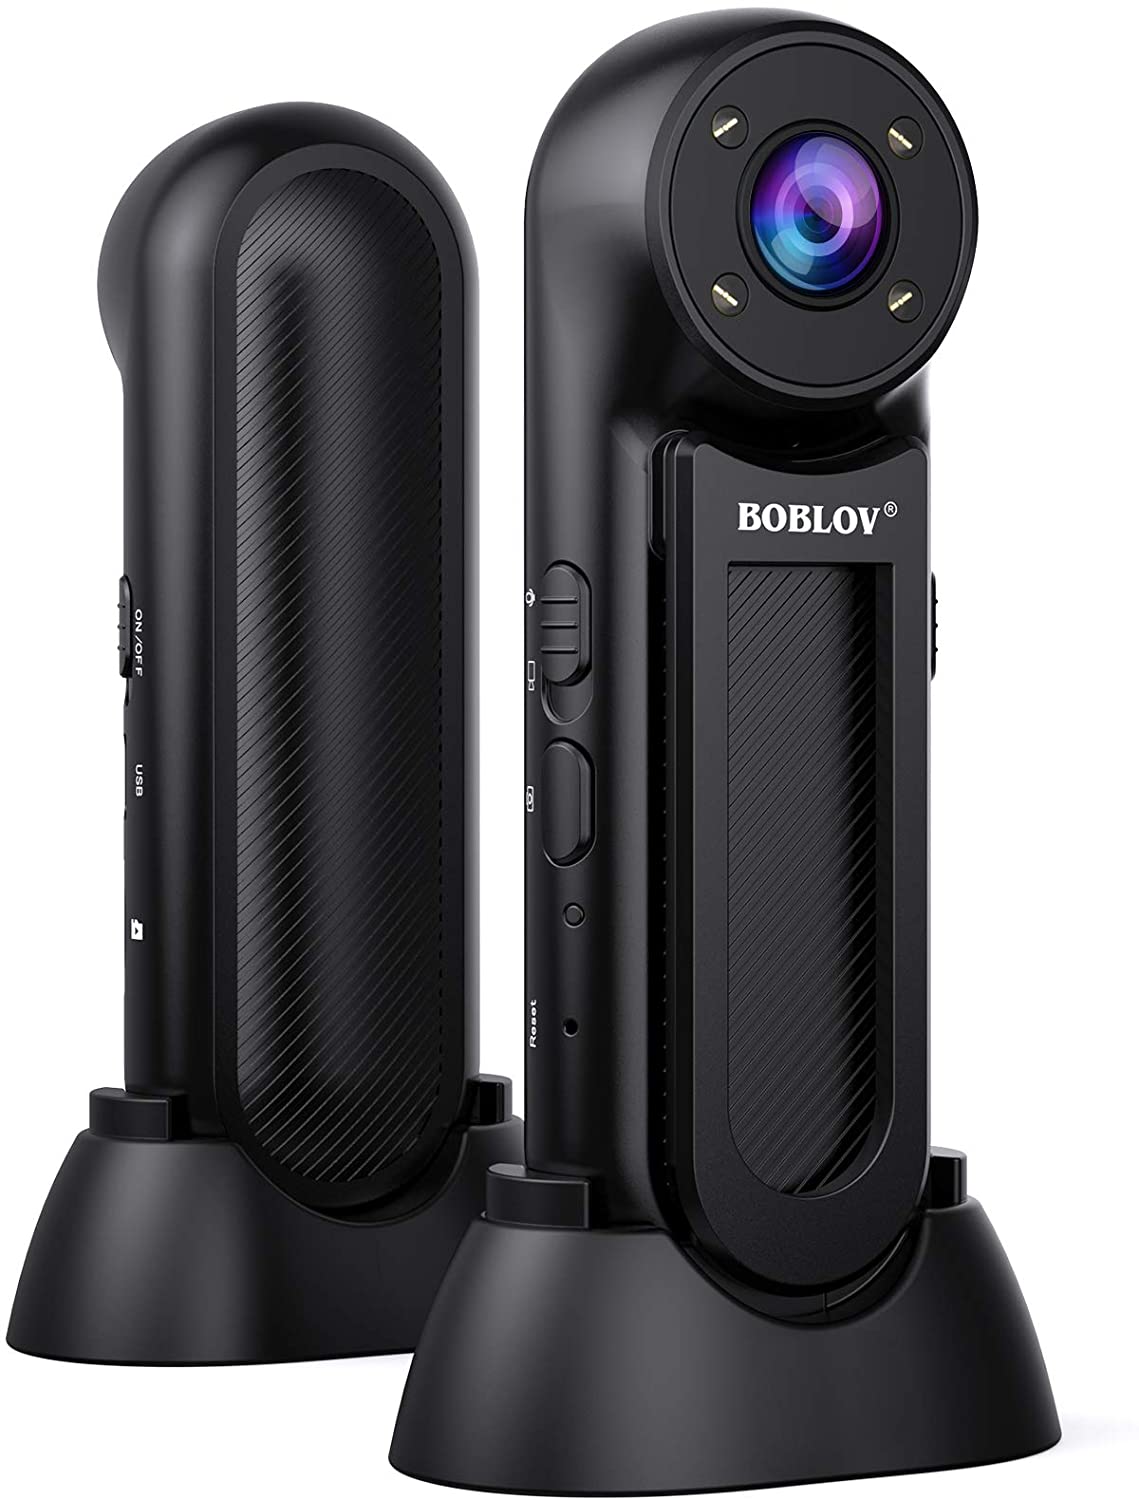 Boblov W2 small body camera with 1080P night vision and high-end Sony IMX307 sensor3